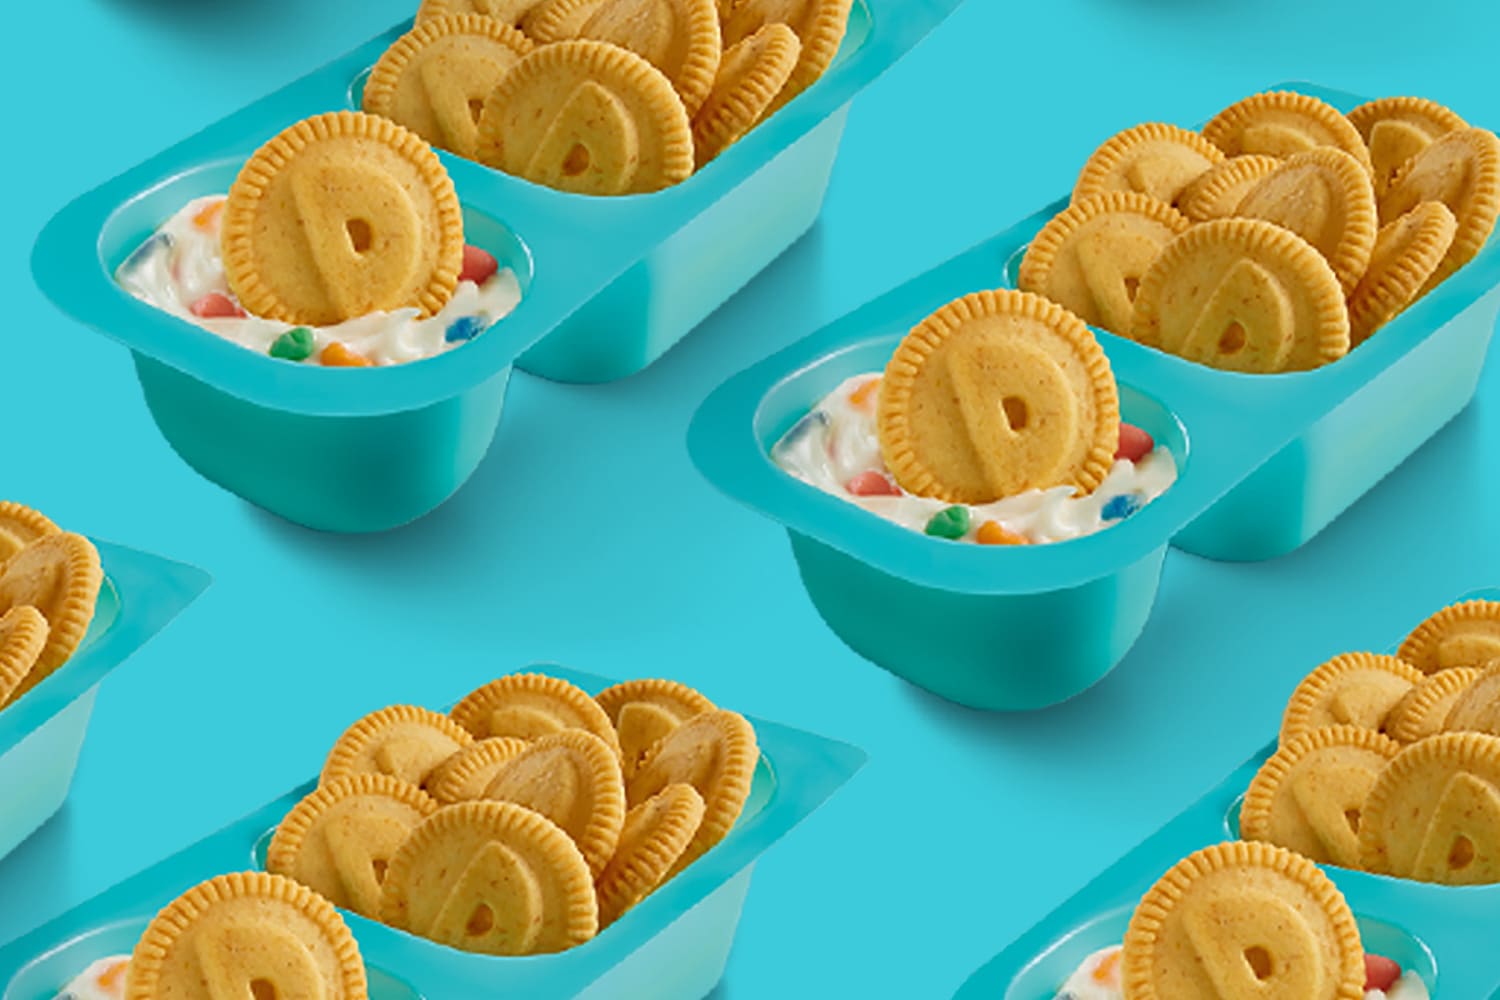 Dunkaroos in teal containers